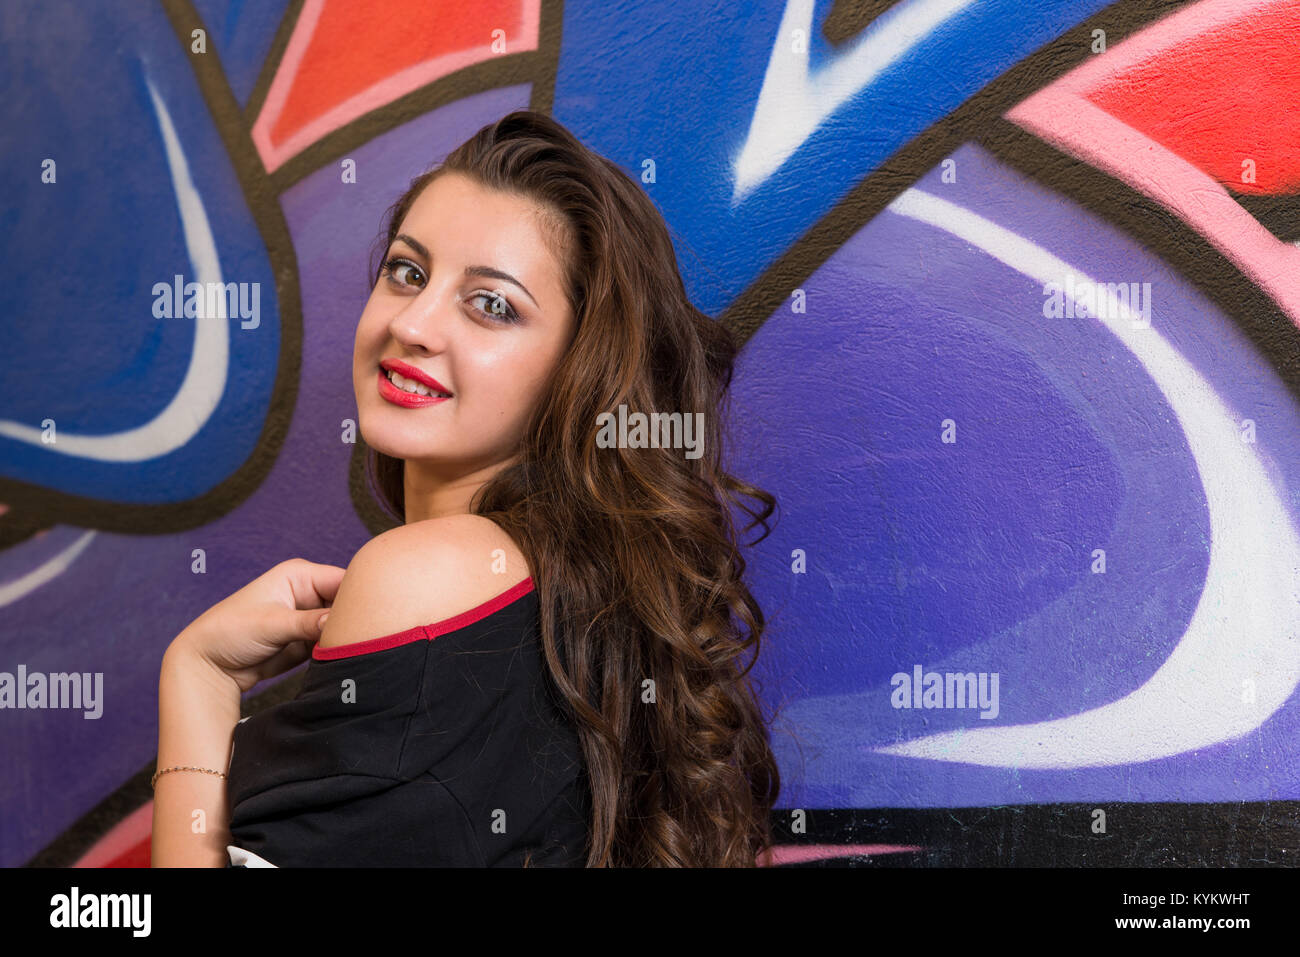 street fashion, portrait near the wall with graffiti. girl brunette chubby lips with red lipstick and curly hair. Stock Photo